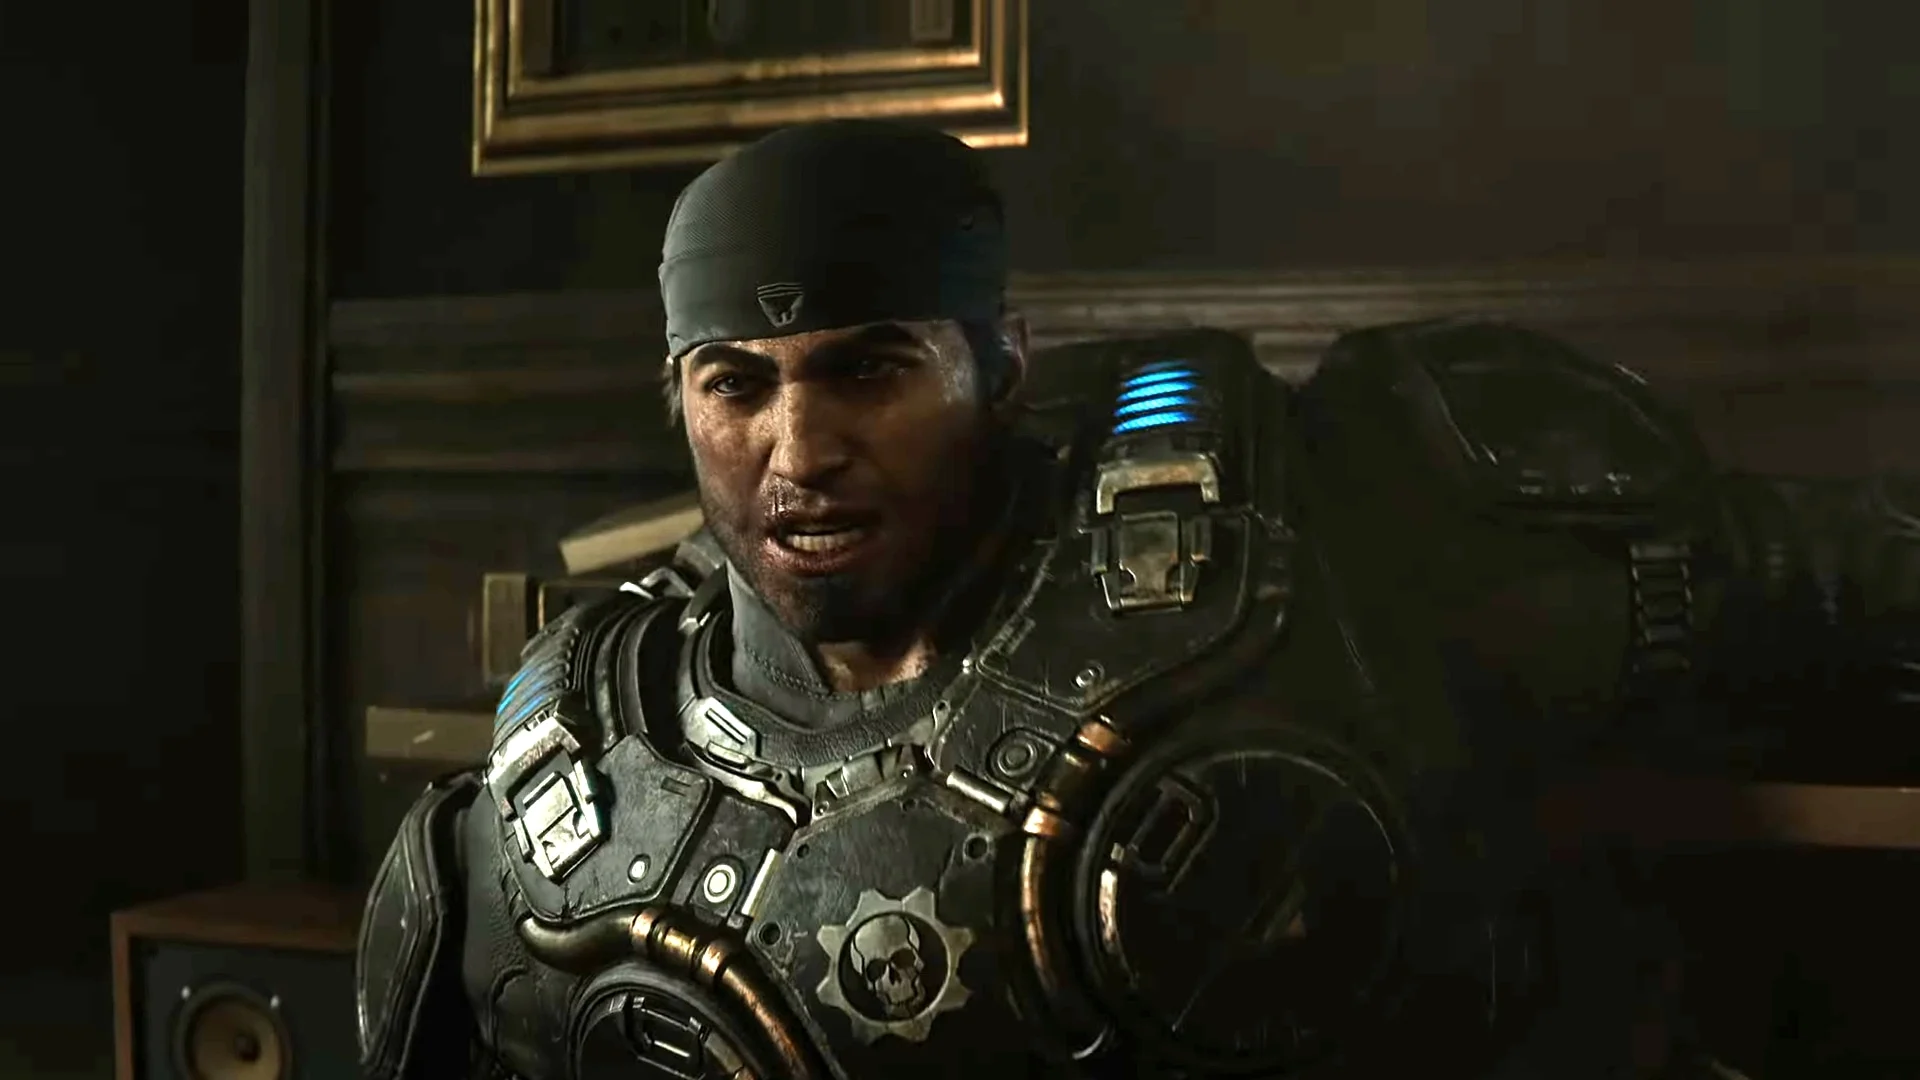 The creative director of Gears of War: E-Day suggests that the game will have multiplayer